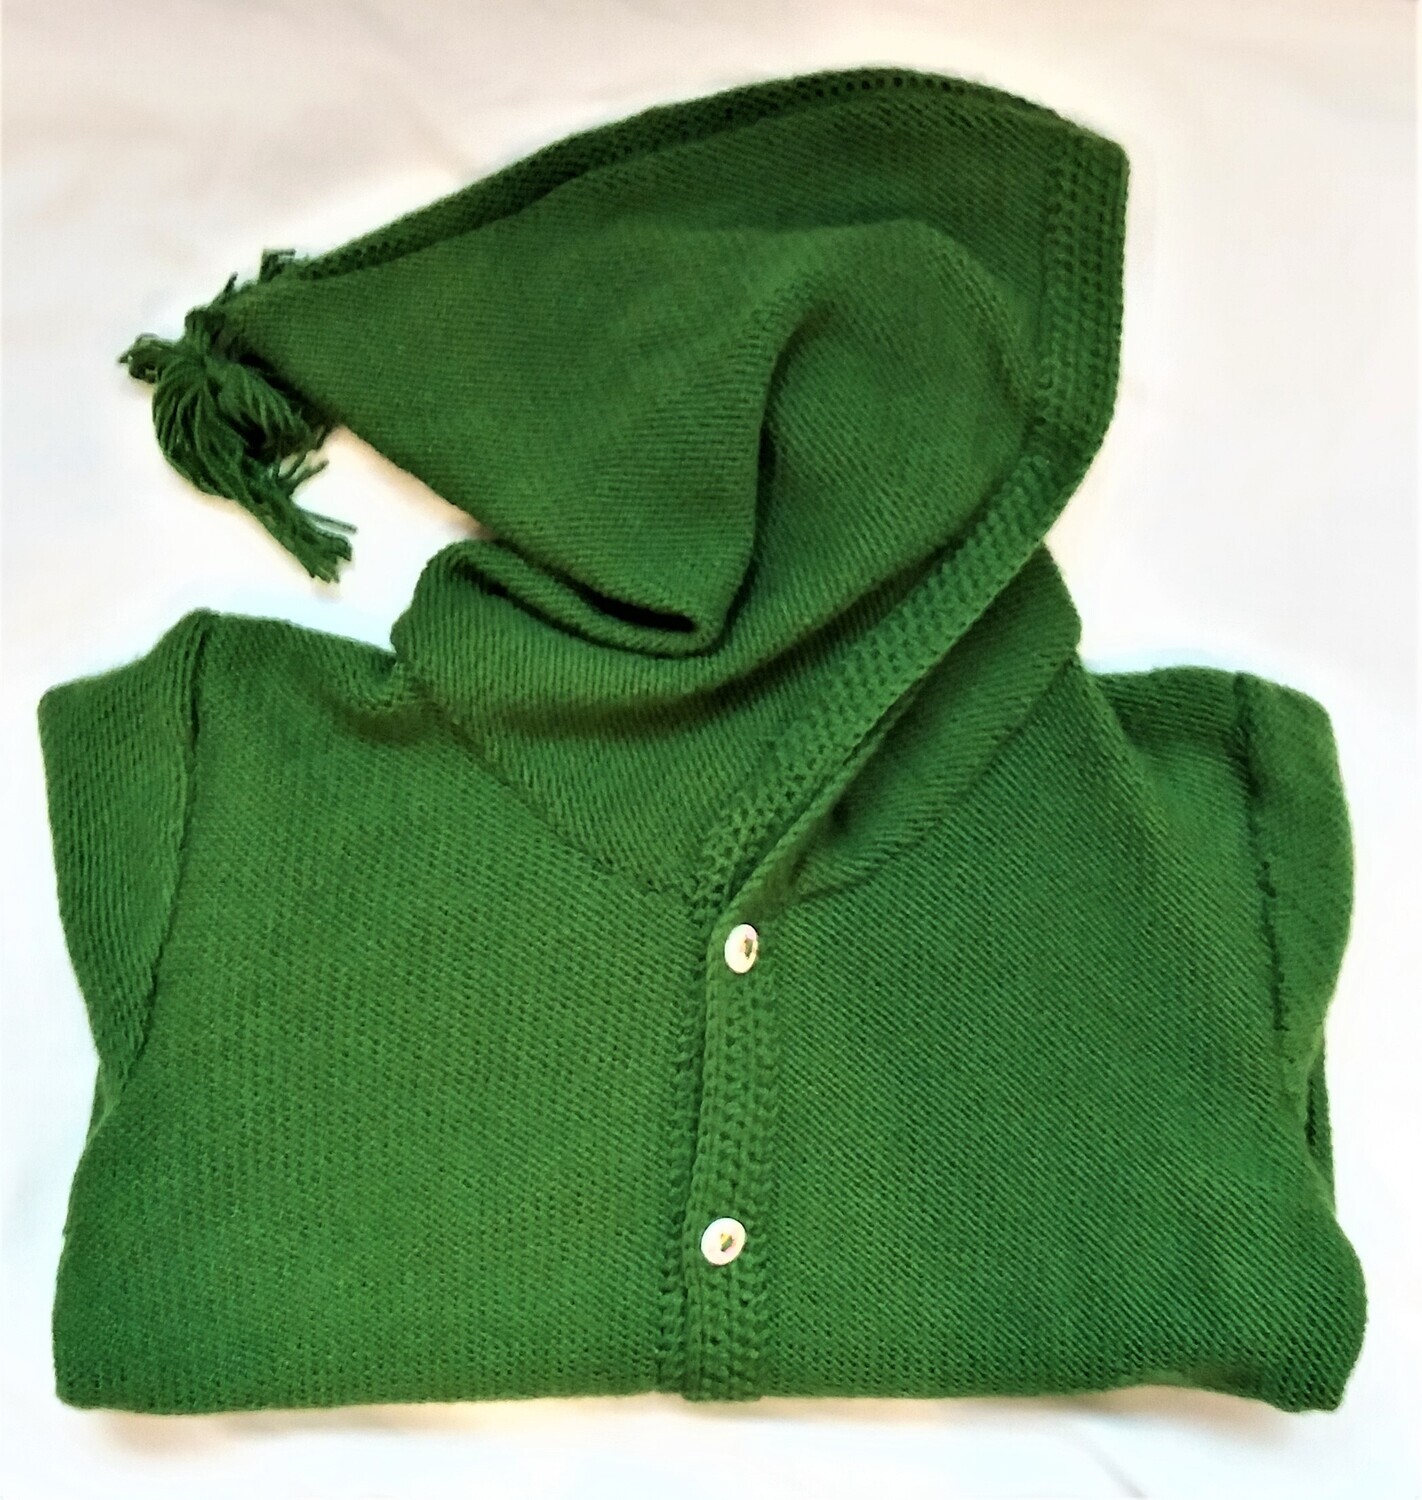 Green Jacket with hood, size 4